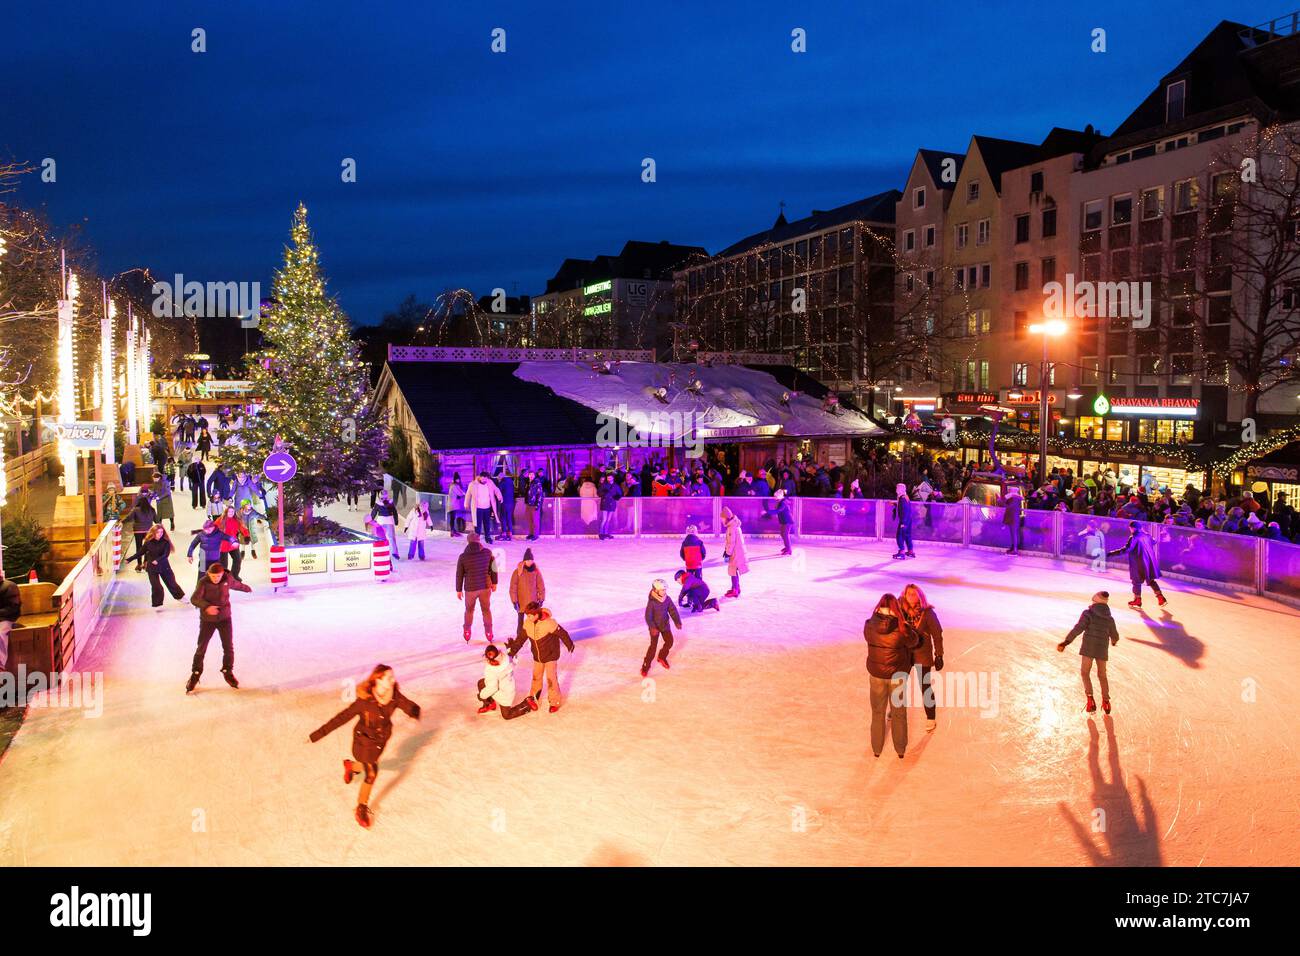 ice skating rink on the Christmas market at the Heumarkt in the historic town, Cologne, Germany. Eislaufbahn auf dem Weihnachtsmarkt am Heumarkt in de Stock Photo